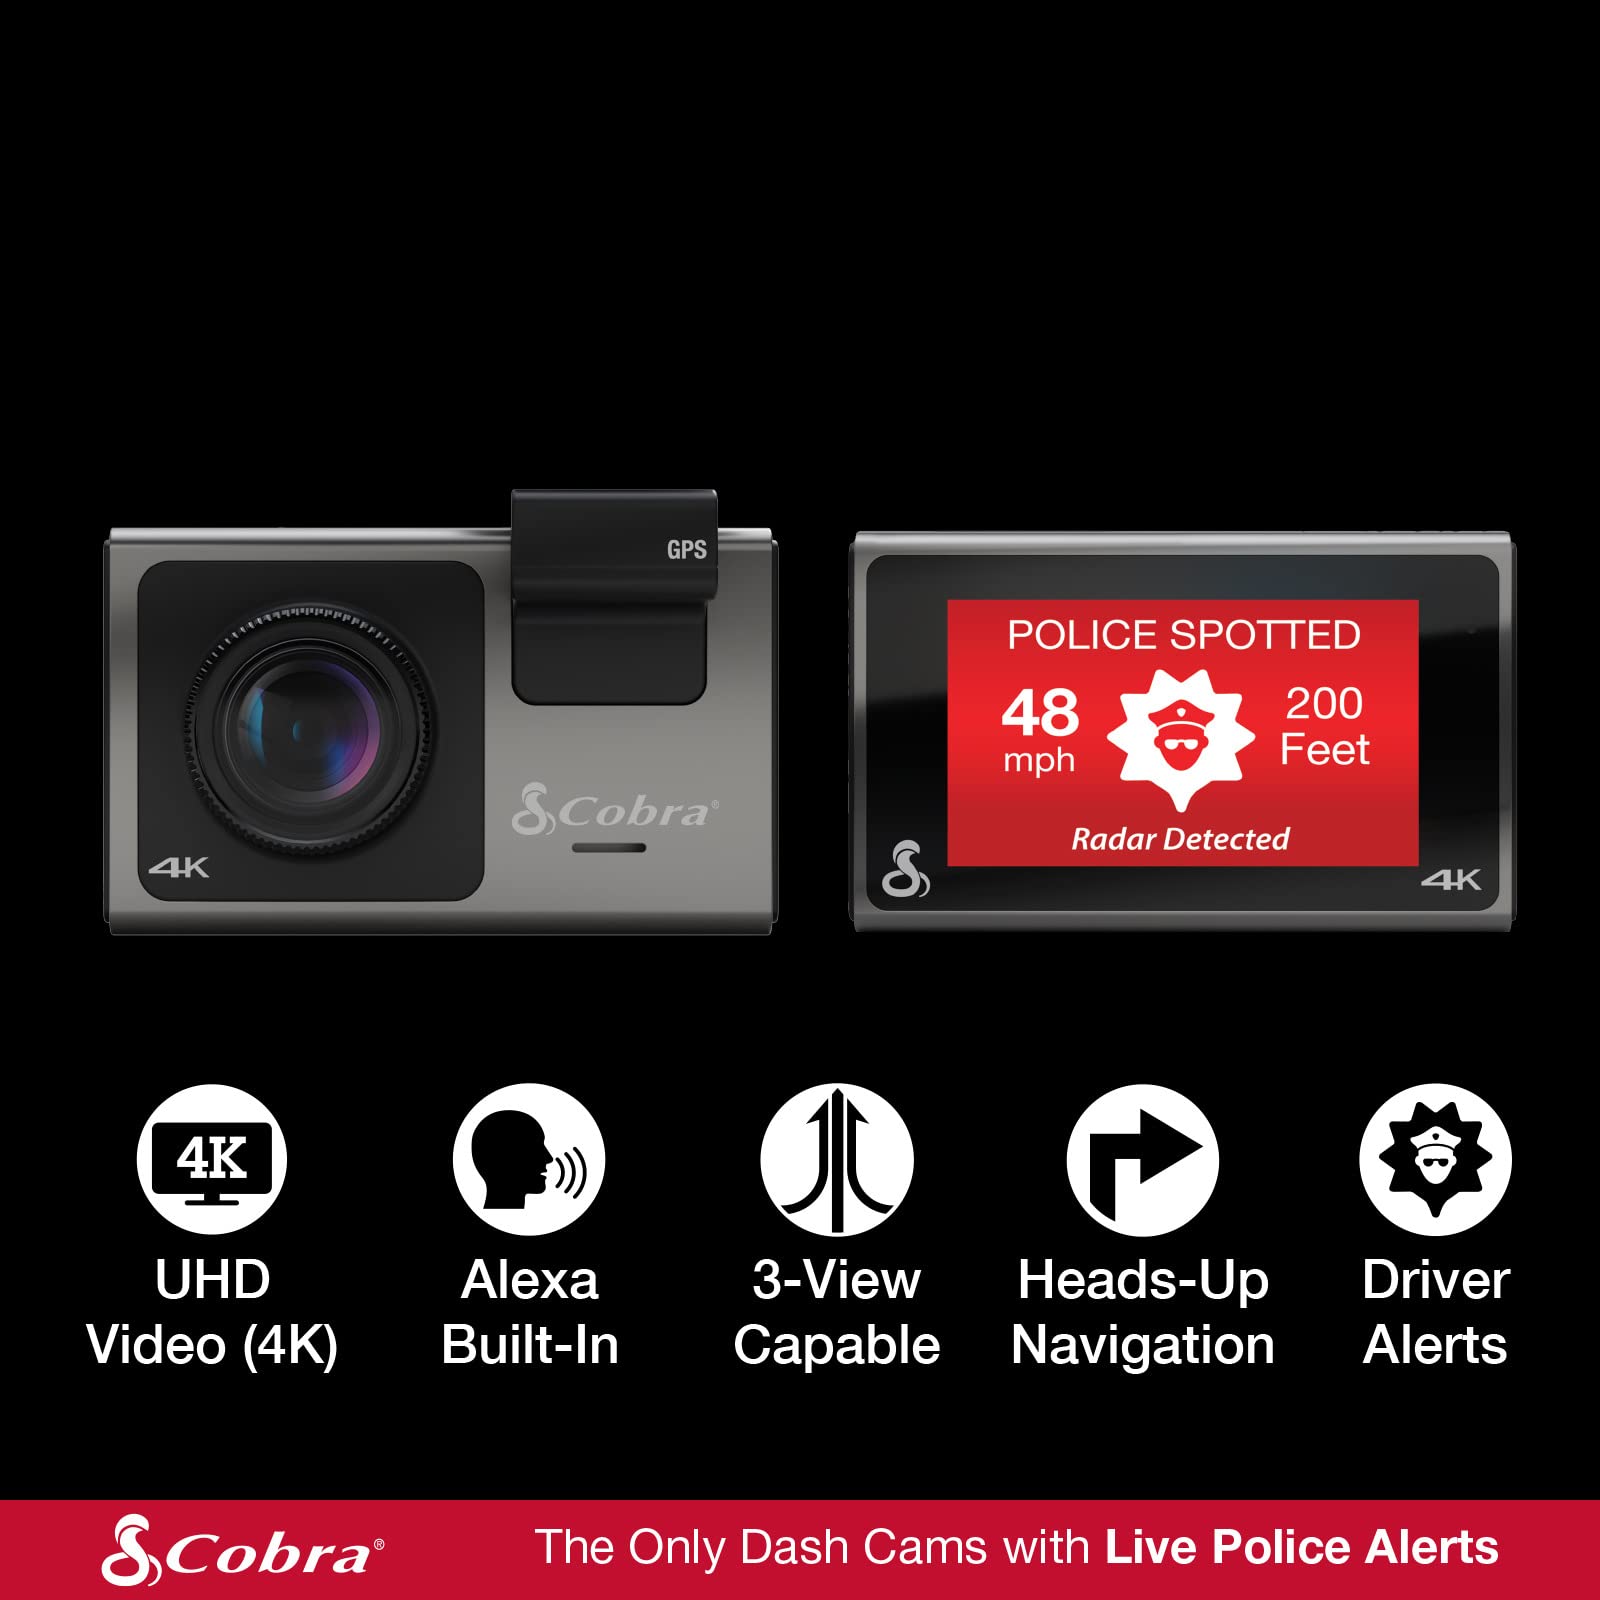 Cobra Smart Dash Cam (SC 400) – UHD 4K Resolution, Built-In Wi-Fi & GPS, Alexa Built-In, Live Police Alerts, Incident Reports, Emergency Mayday, Drive Smarter App, 3